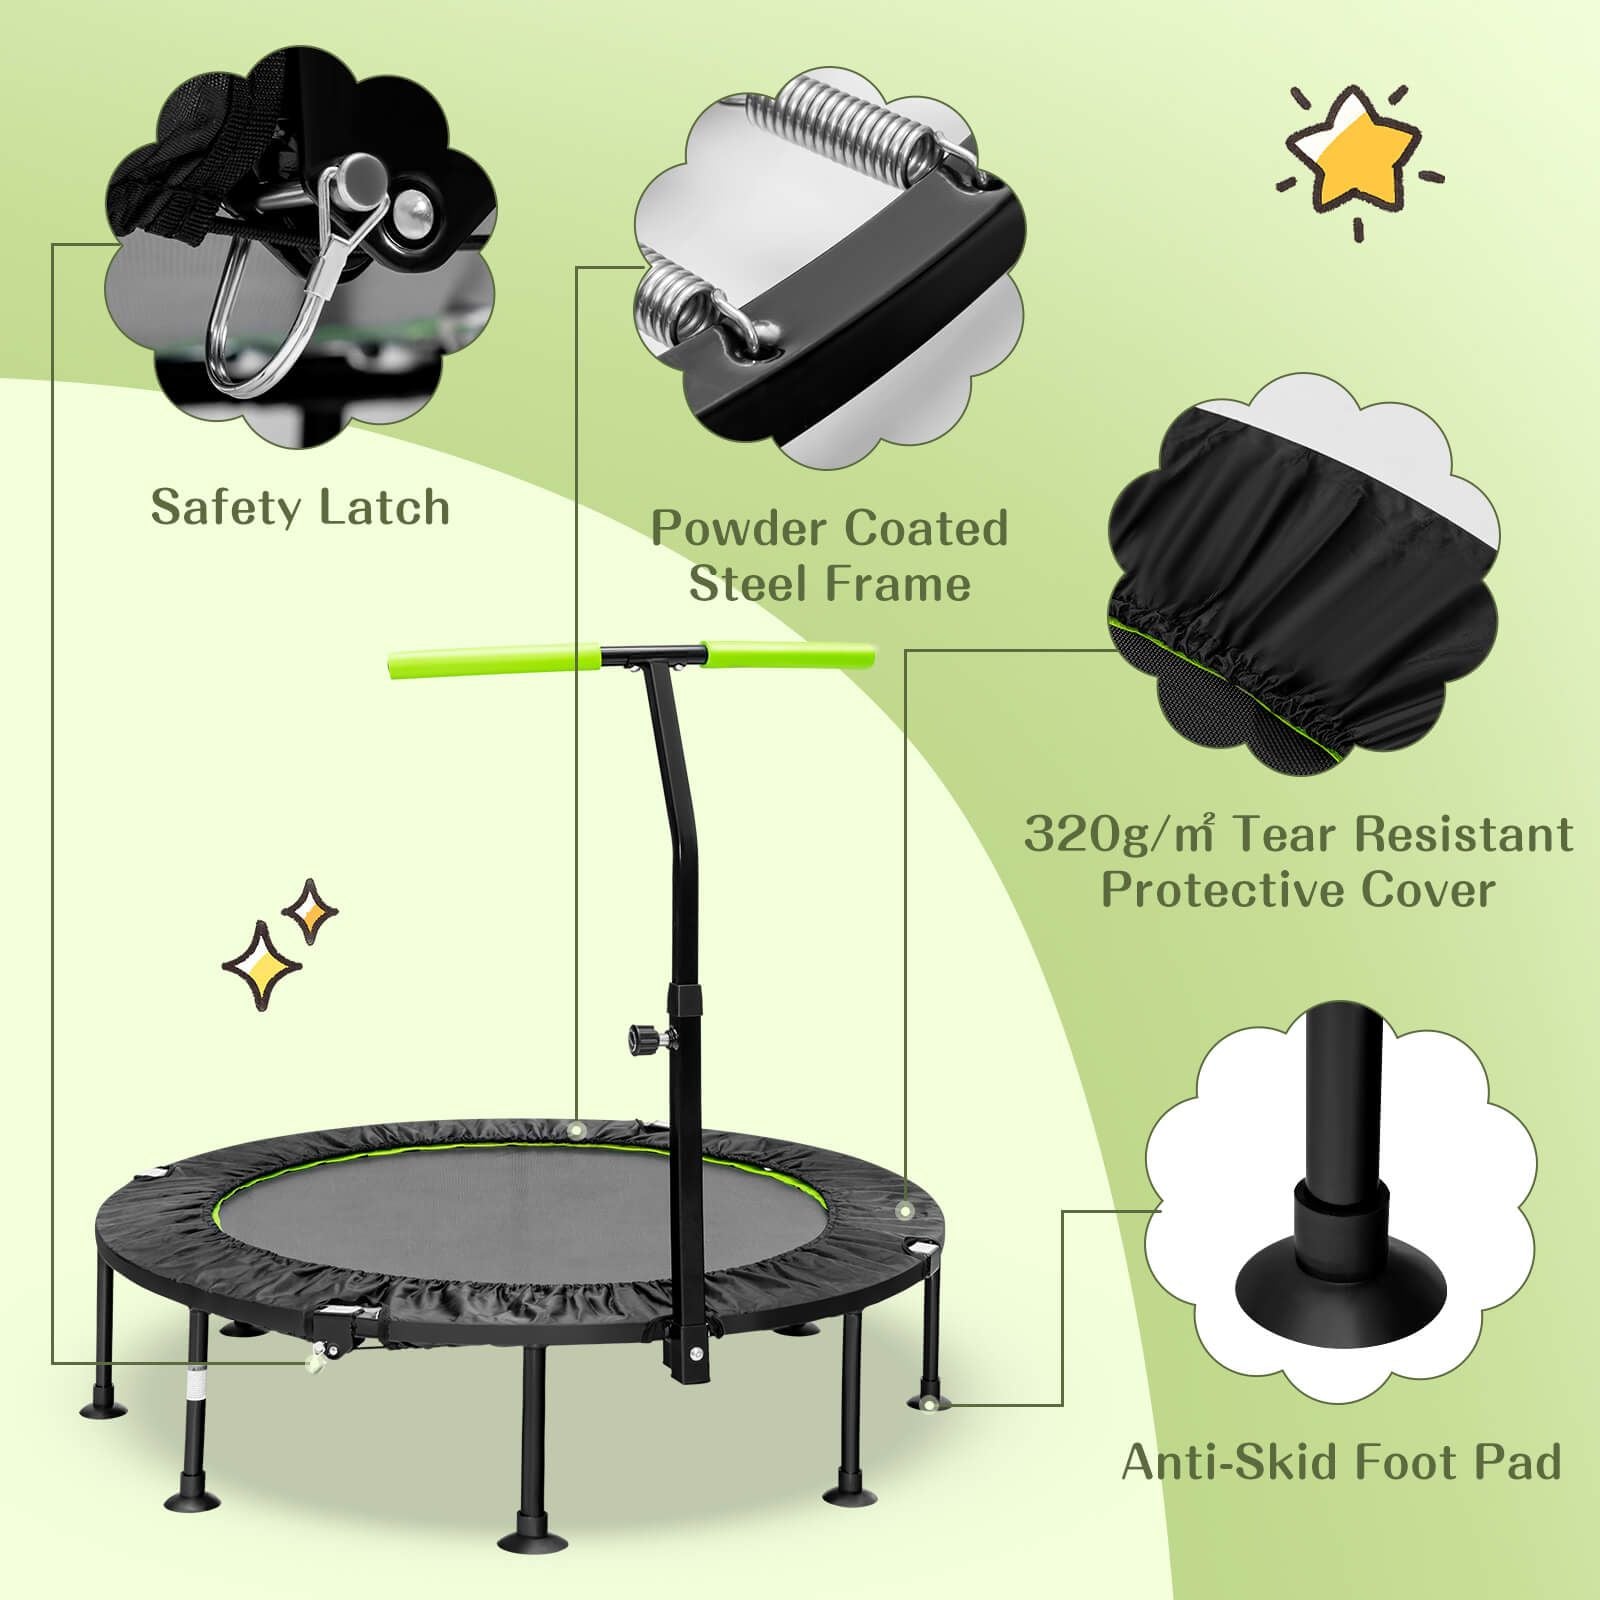 110 CM Mini Trampoline Bounce with Height Adjustable Handrail